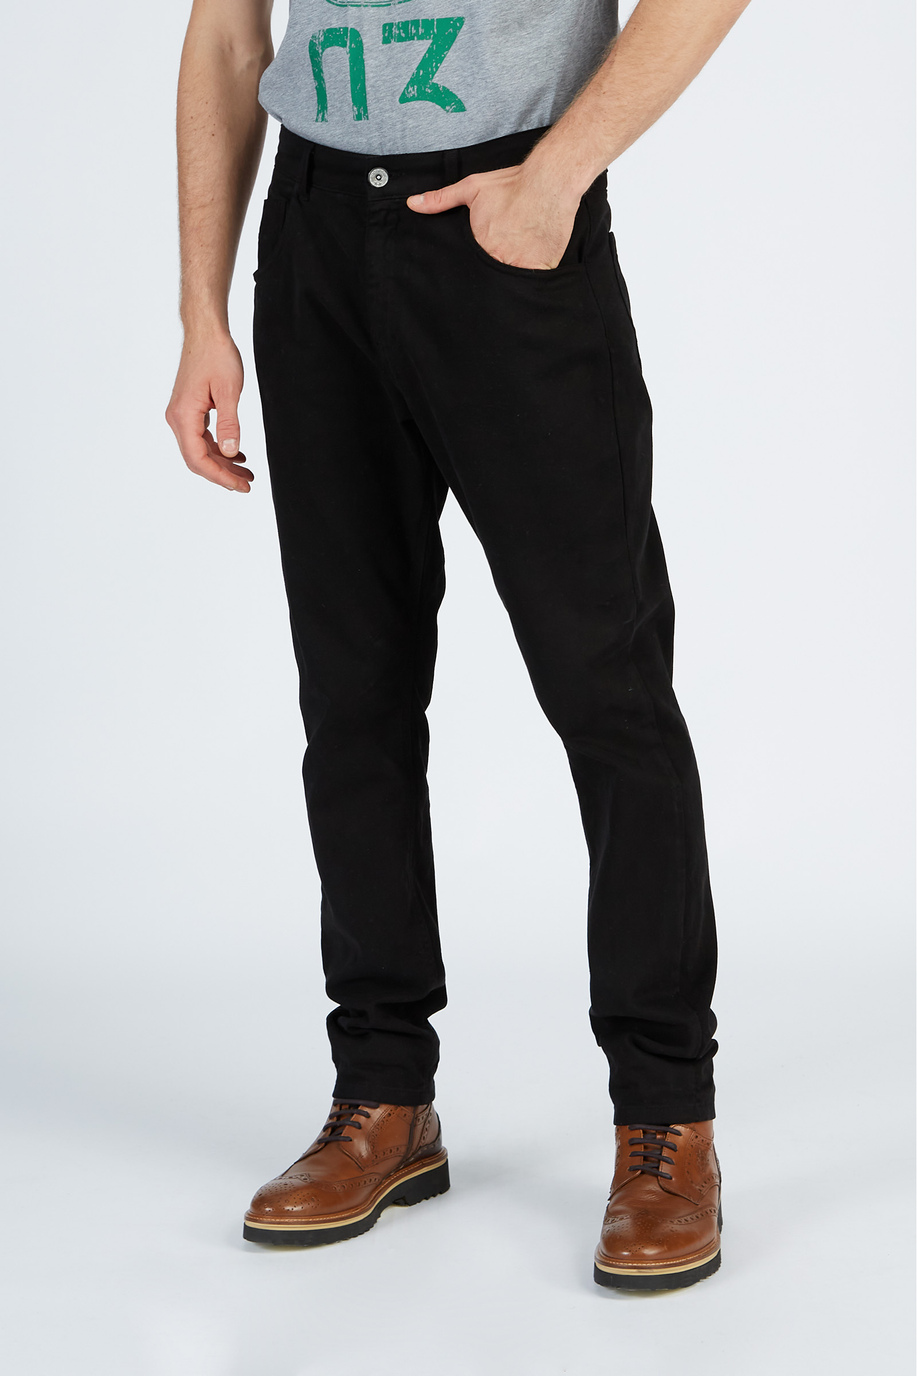 Men’s trousers in stretch cotton regular fit chino model - Party season for him | La Martina - Official Online Shop